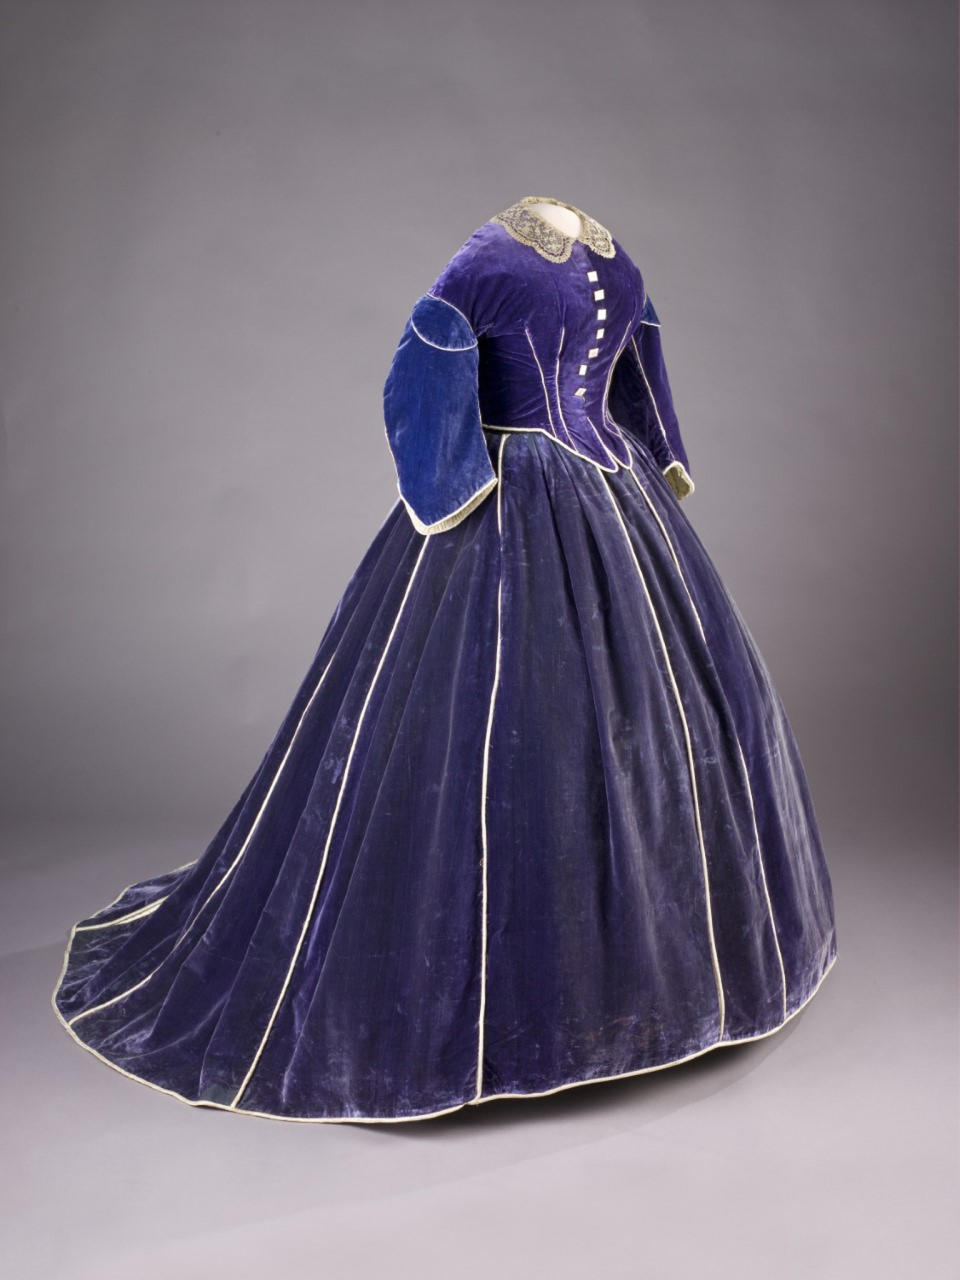 An Elizabeth Keckley-designed gown for Mary Todd Lincoln. - Credit: Courtesy the bequest of Mrs. Julian James